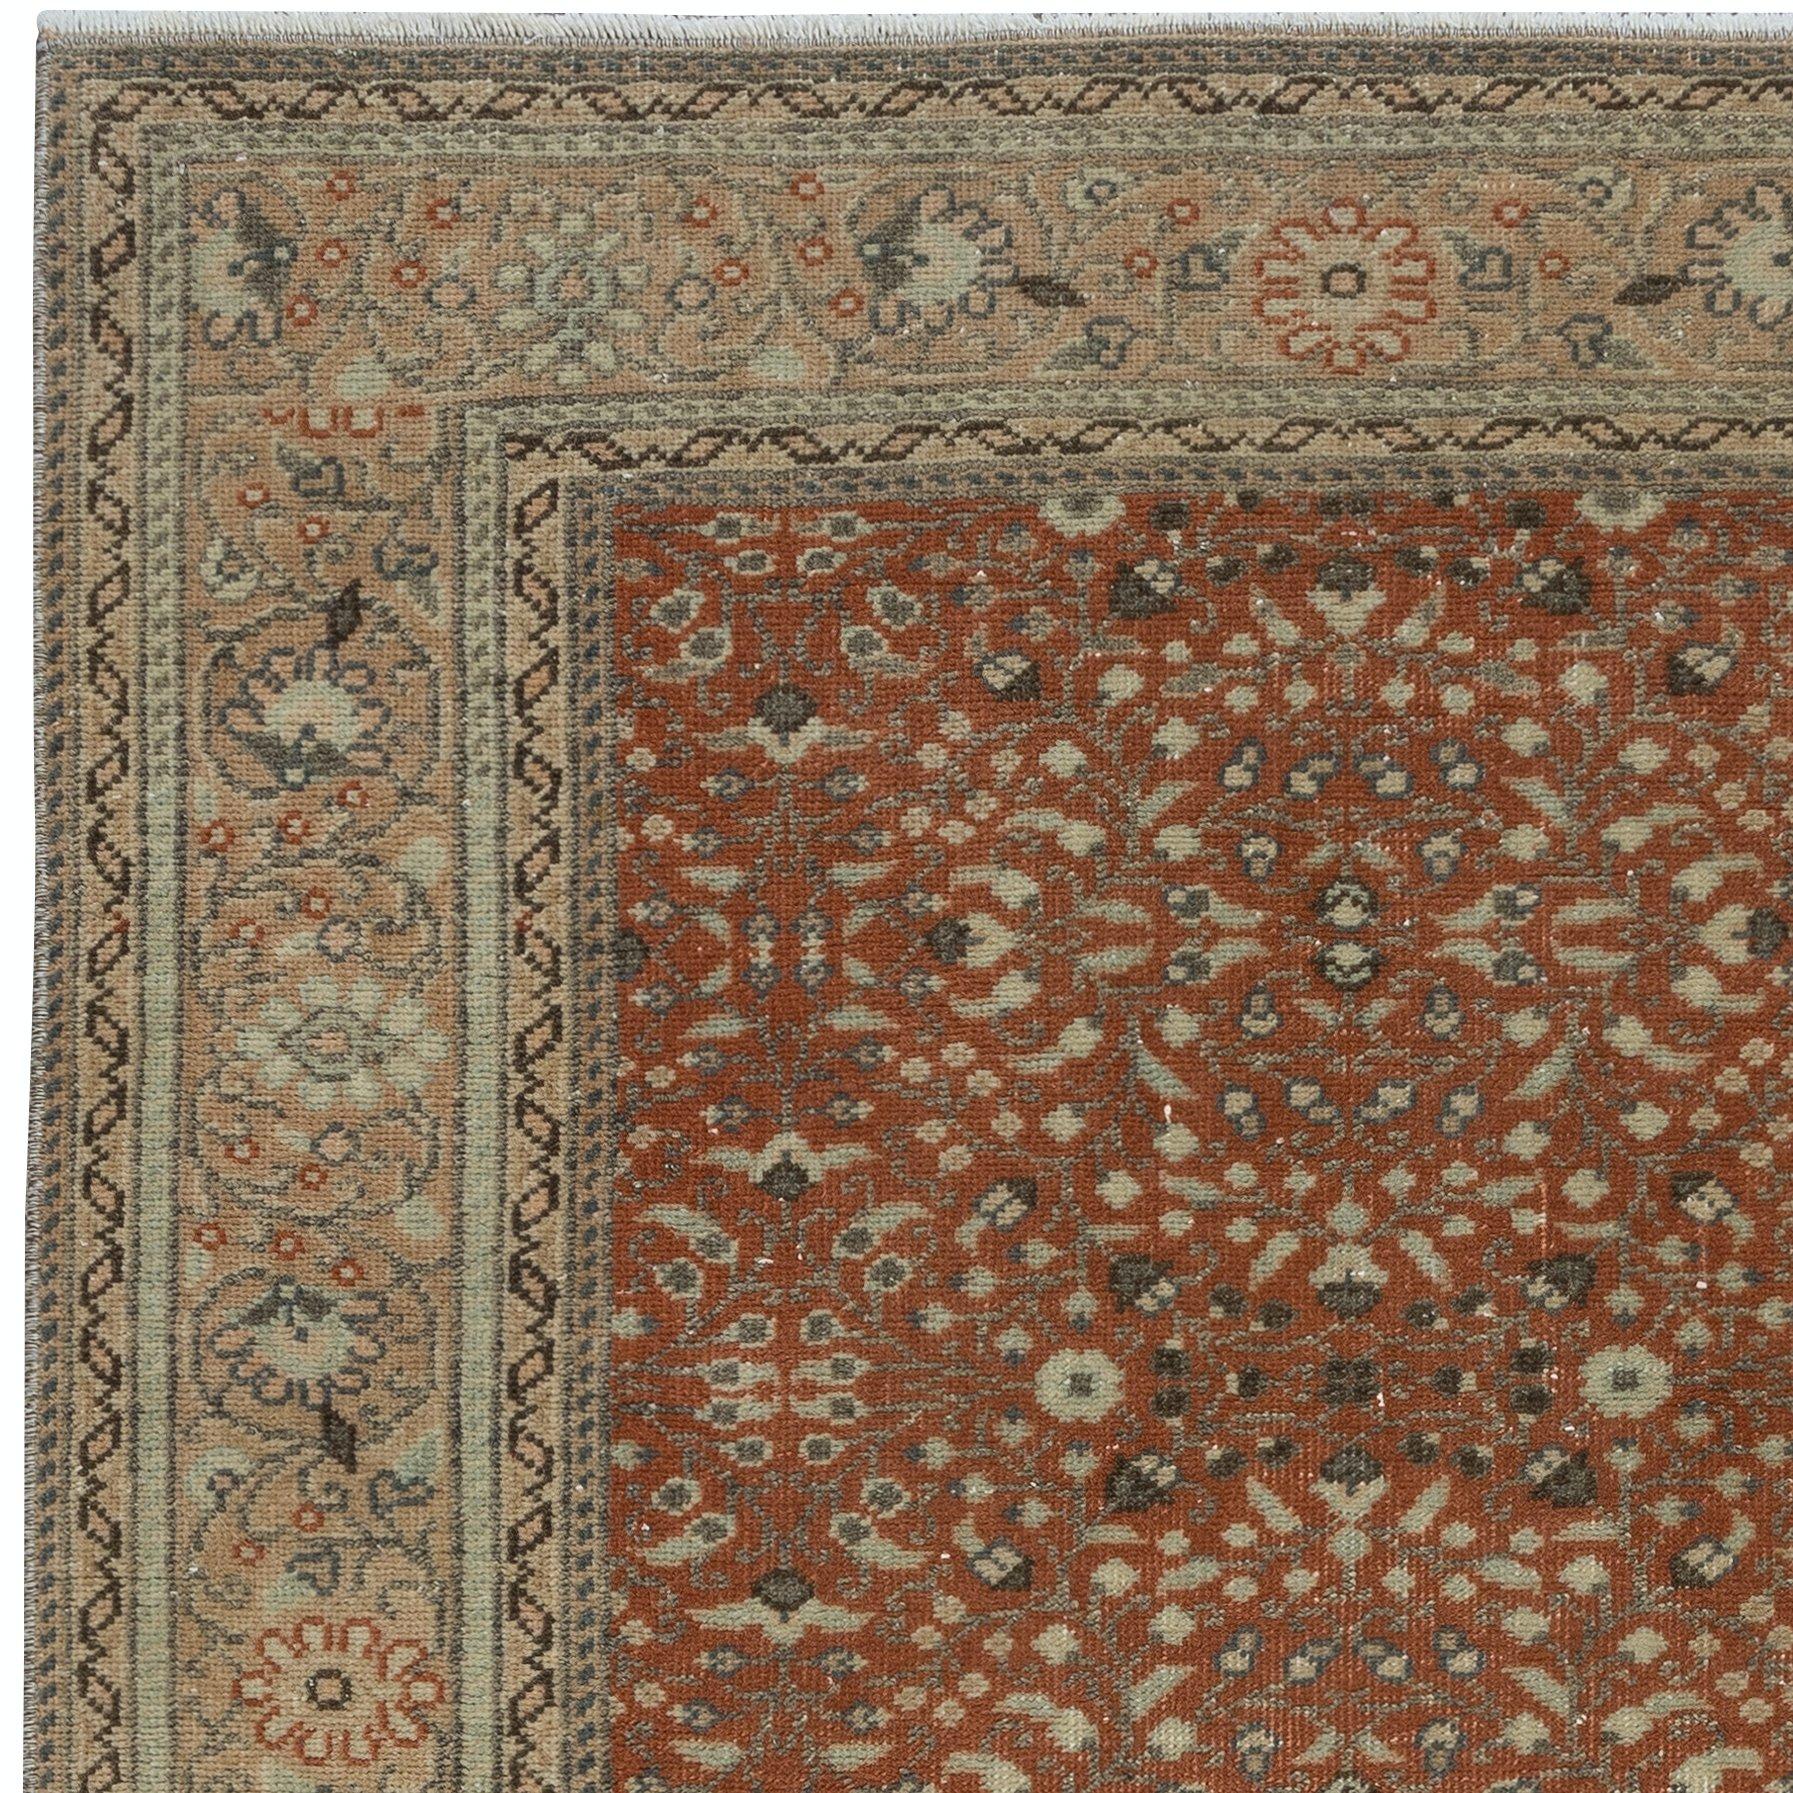 Turc 2.8x4.3 Ft Mid-Century Handmade Turkish Small Rug with All-Over Floral Design (en anglais) en vente